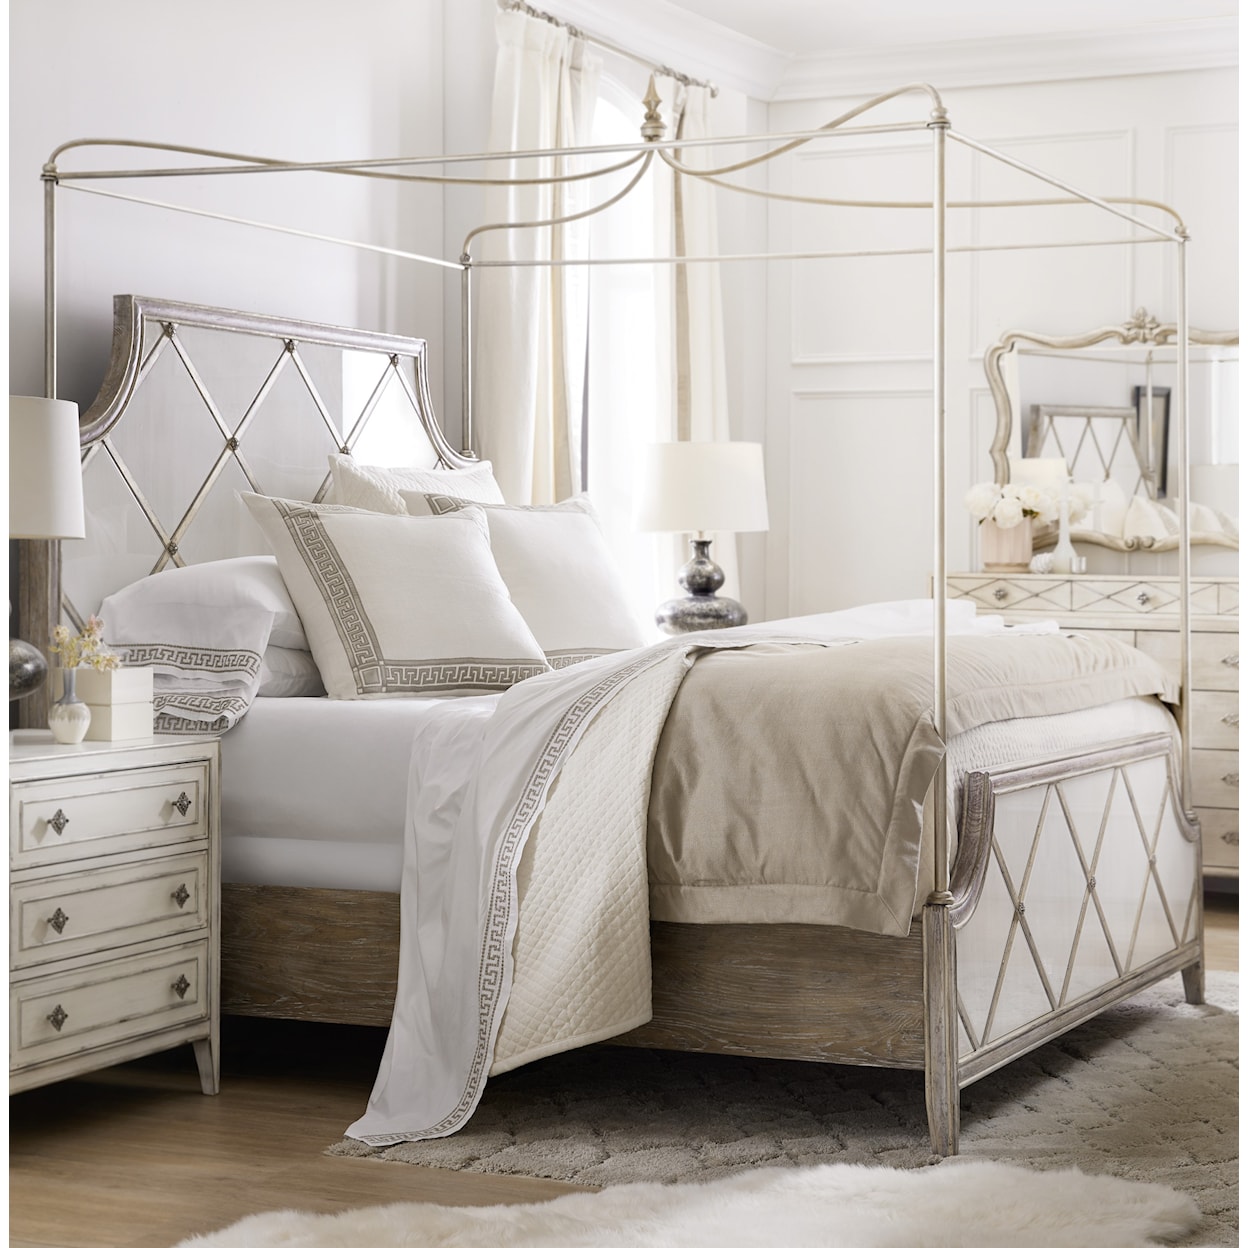 Hooker Furniture Sanctuary Diamont King Canopy Bed